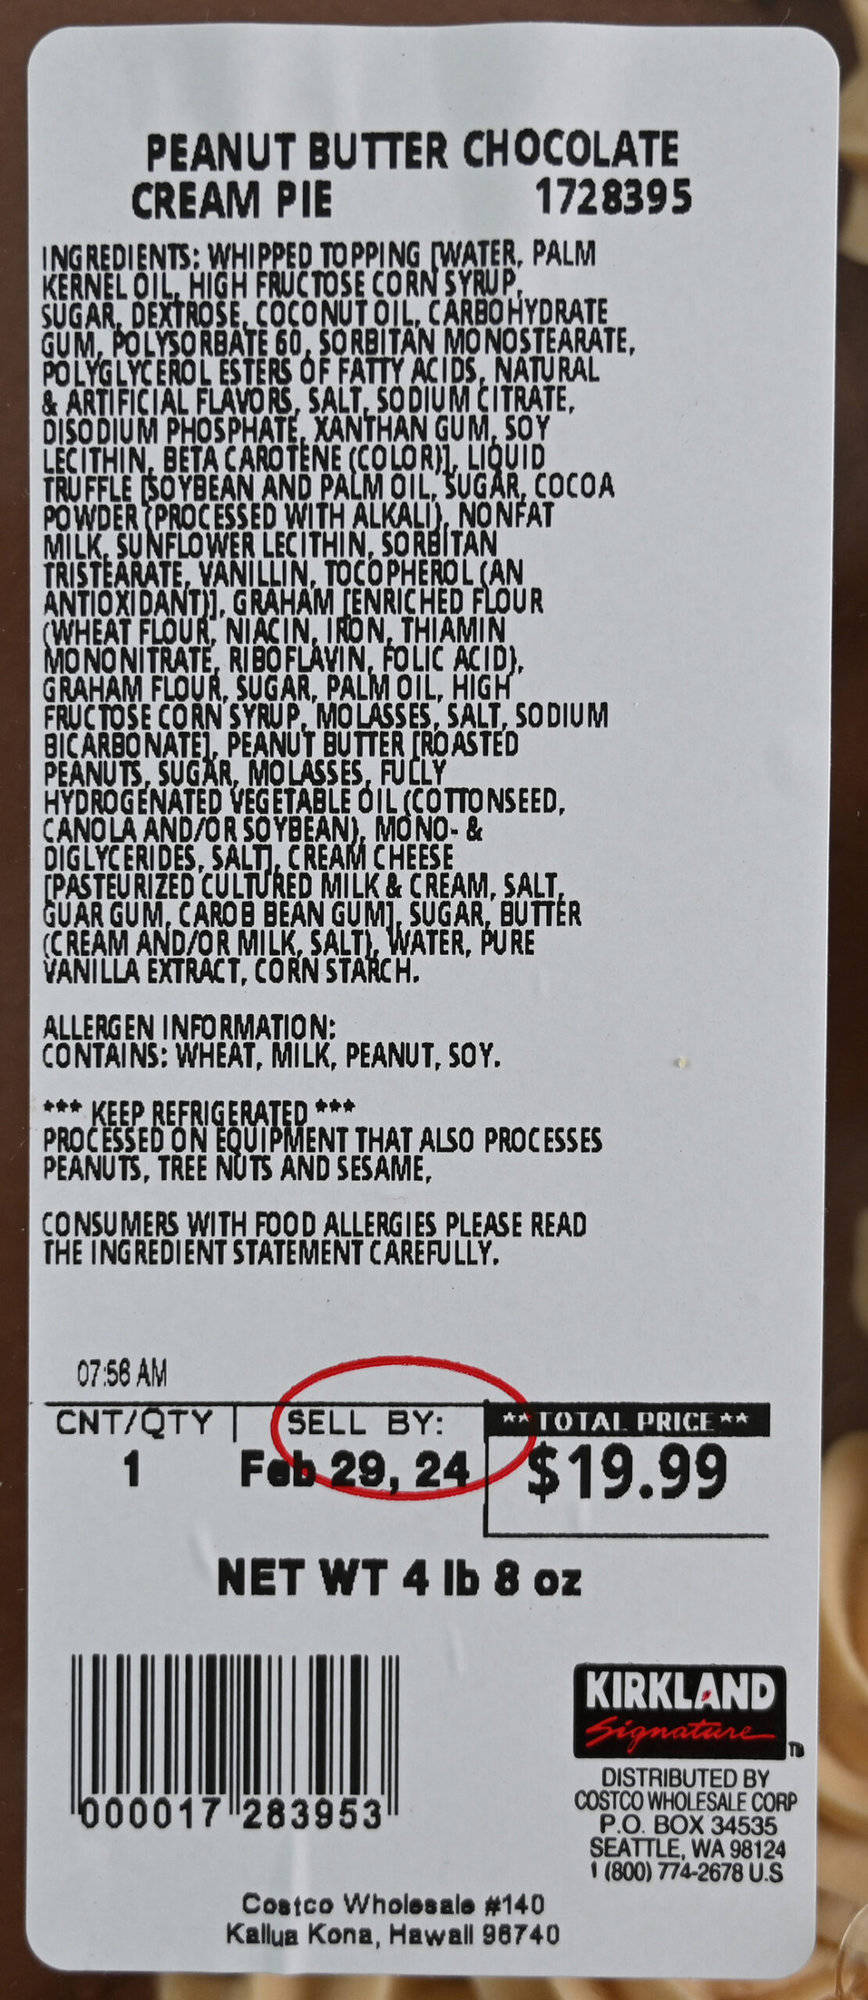 Image of the front label on the pie showing ingredients, sell by date and price.